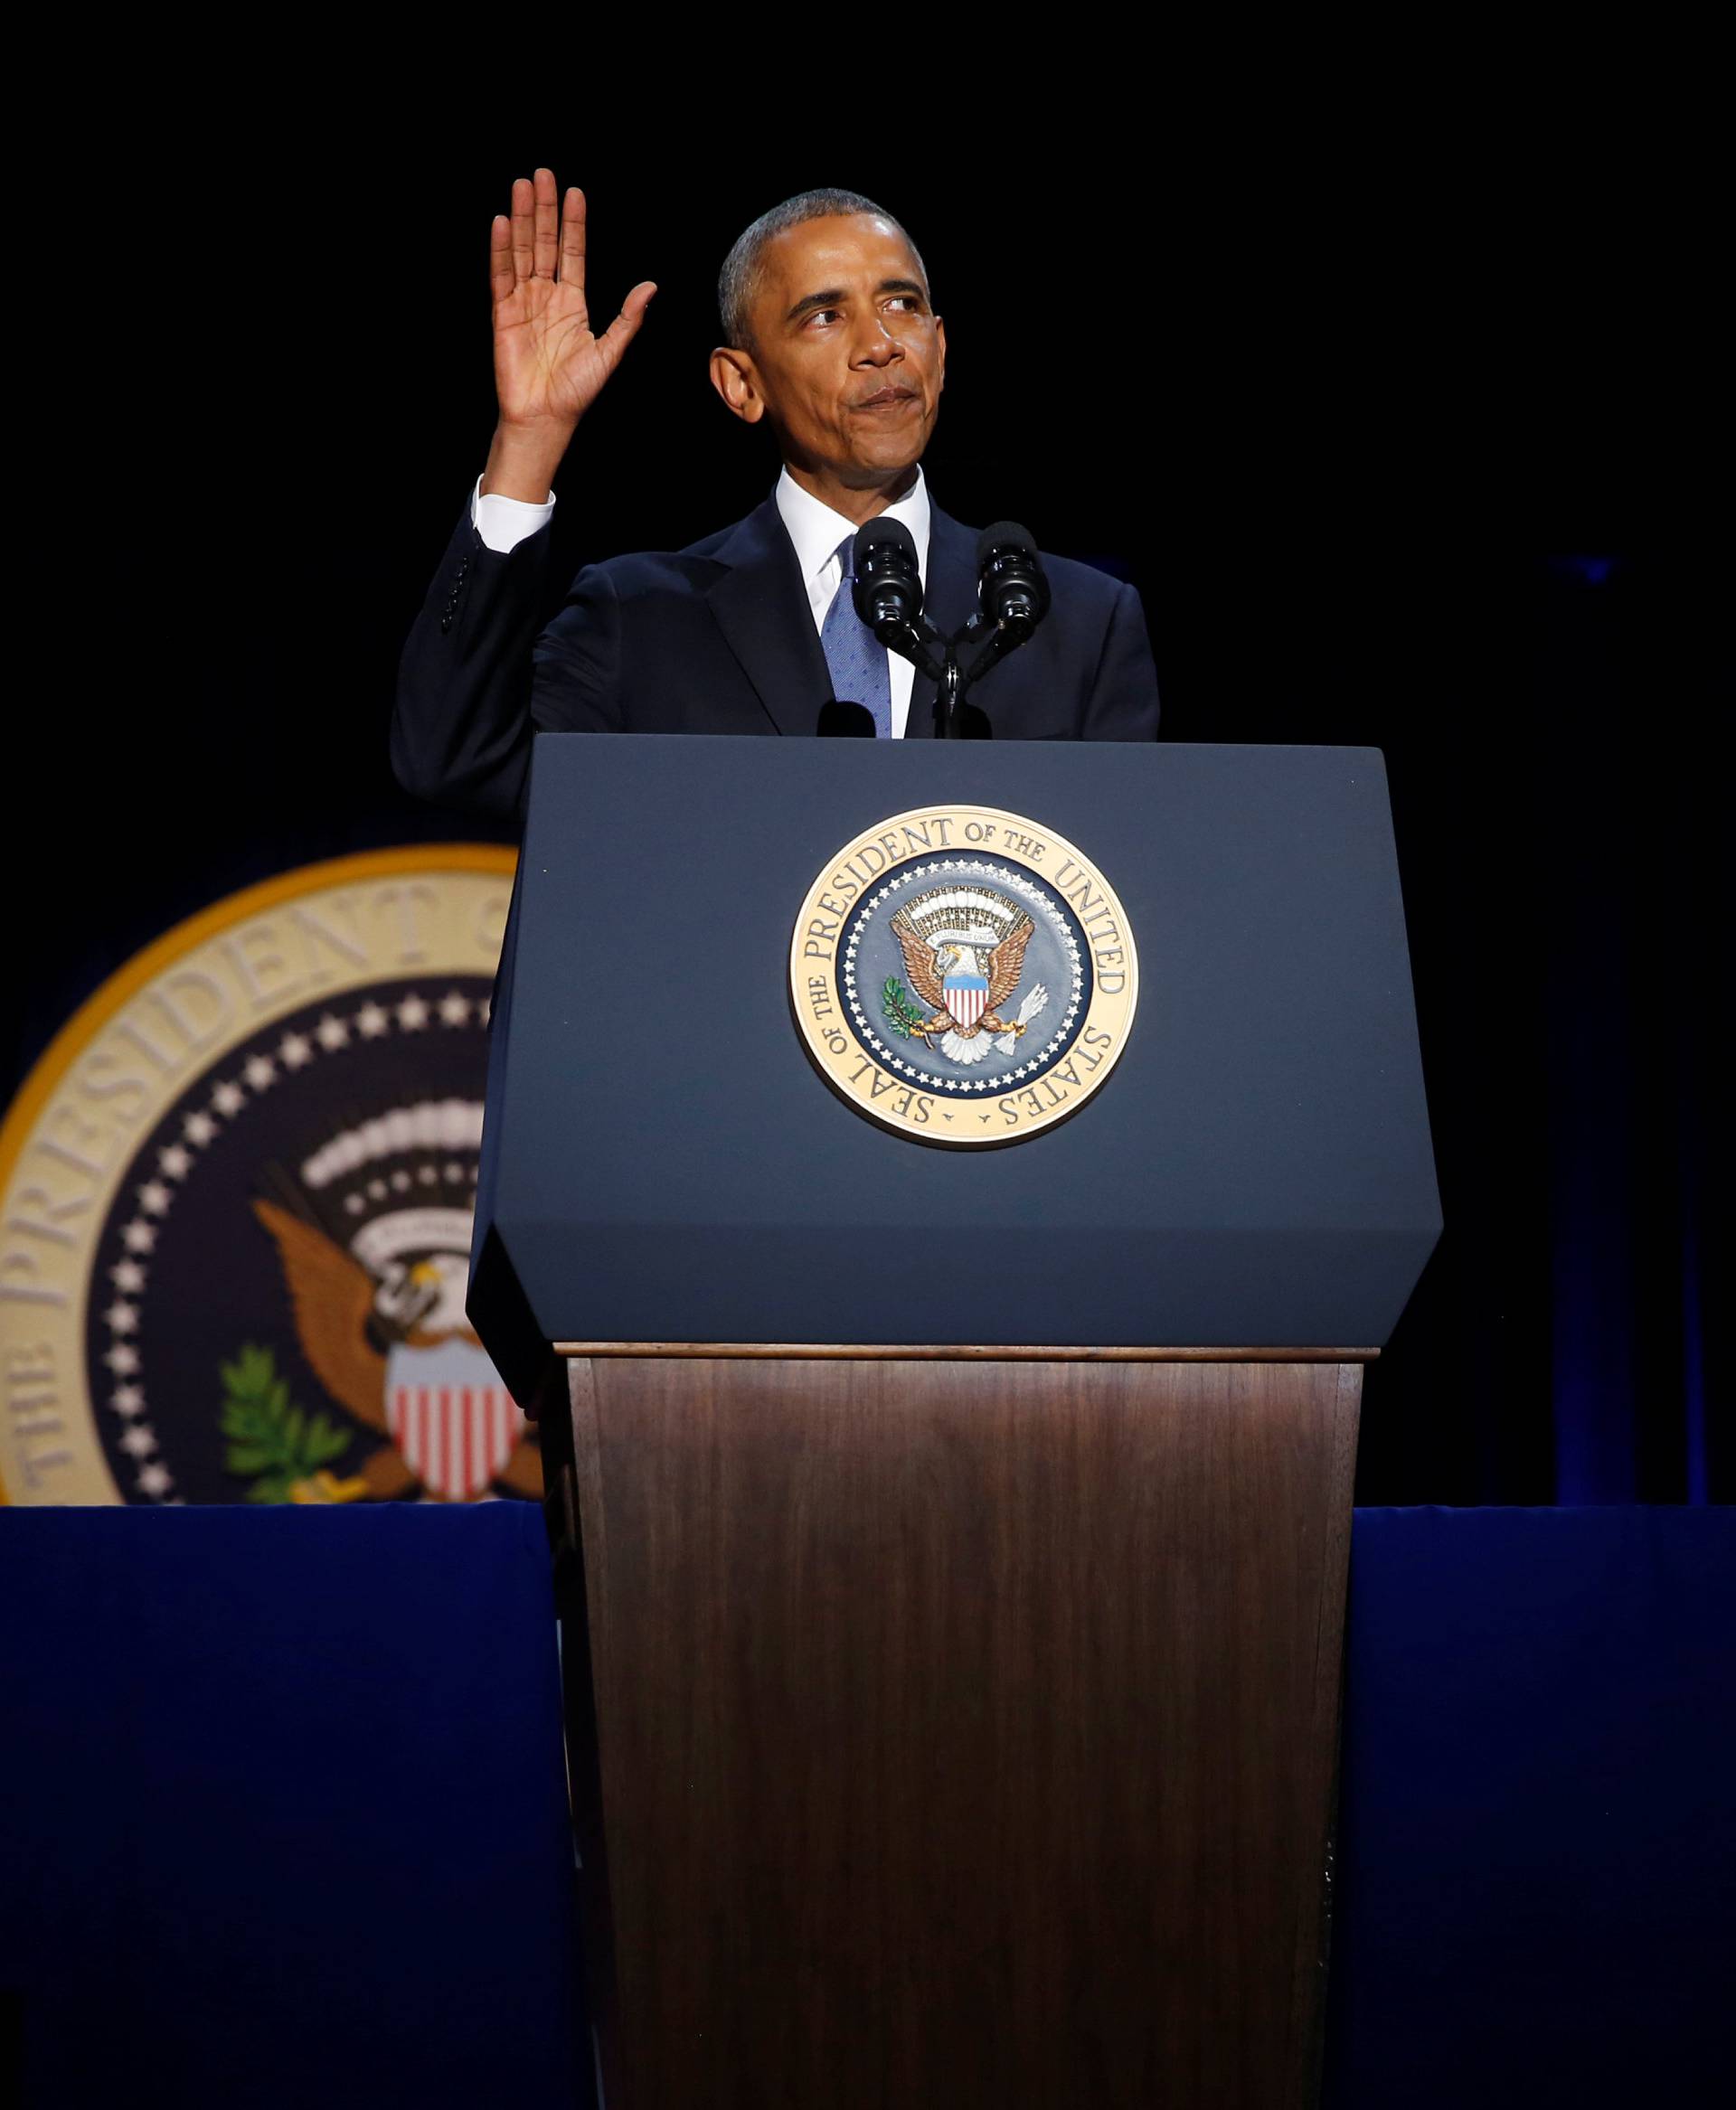 Obama concludes his farewell address in Chicago